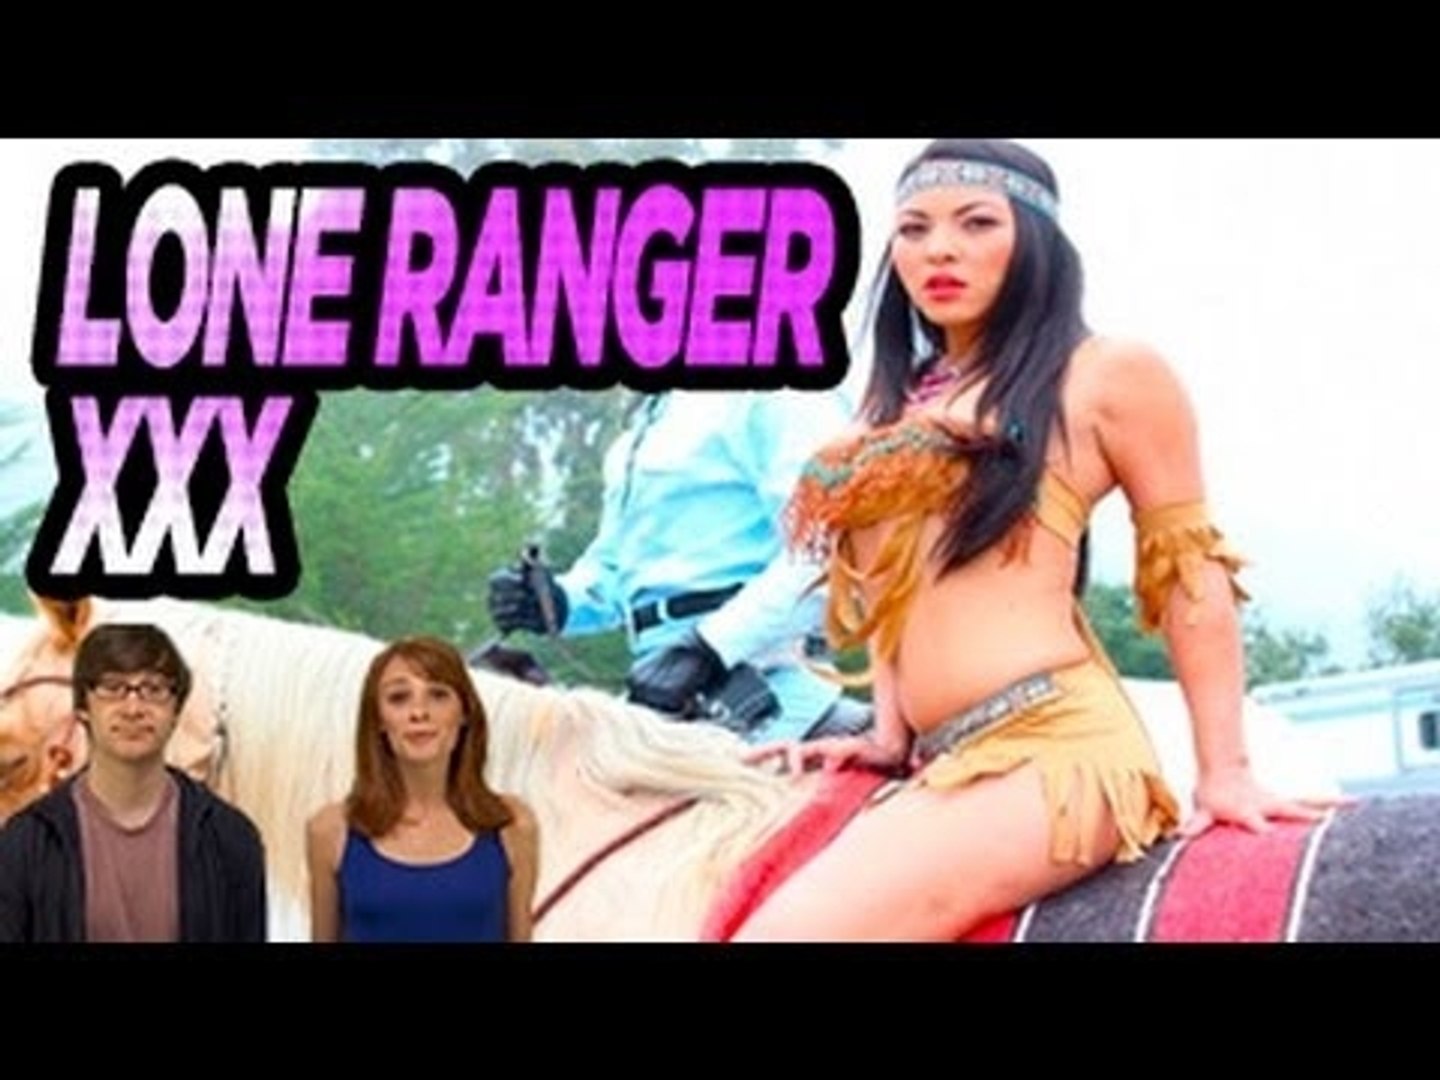 P0rm Xxx - Well, Now This Is Happening - There's a Lone Ranger XXX P0rn Parody - video  Dailymotion